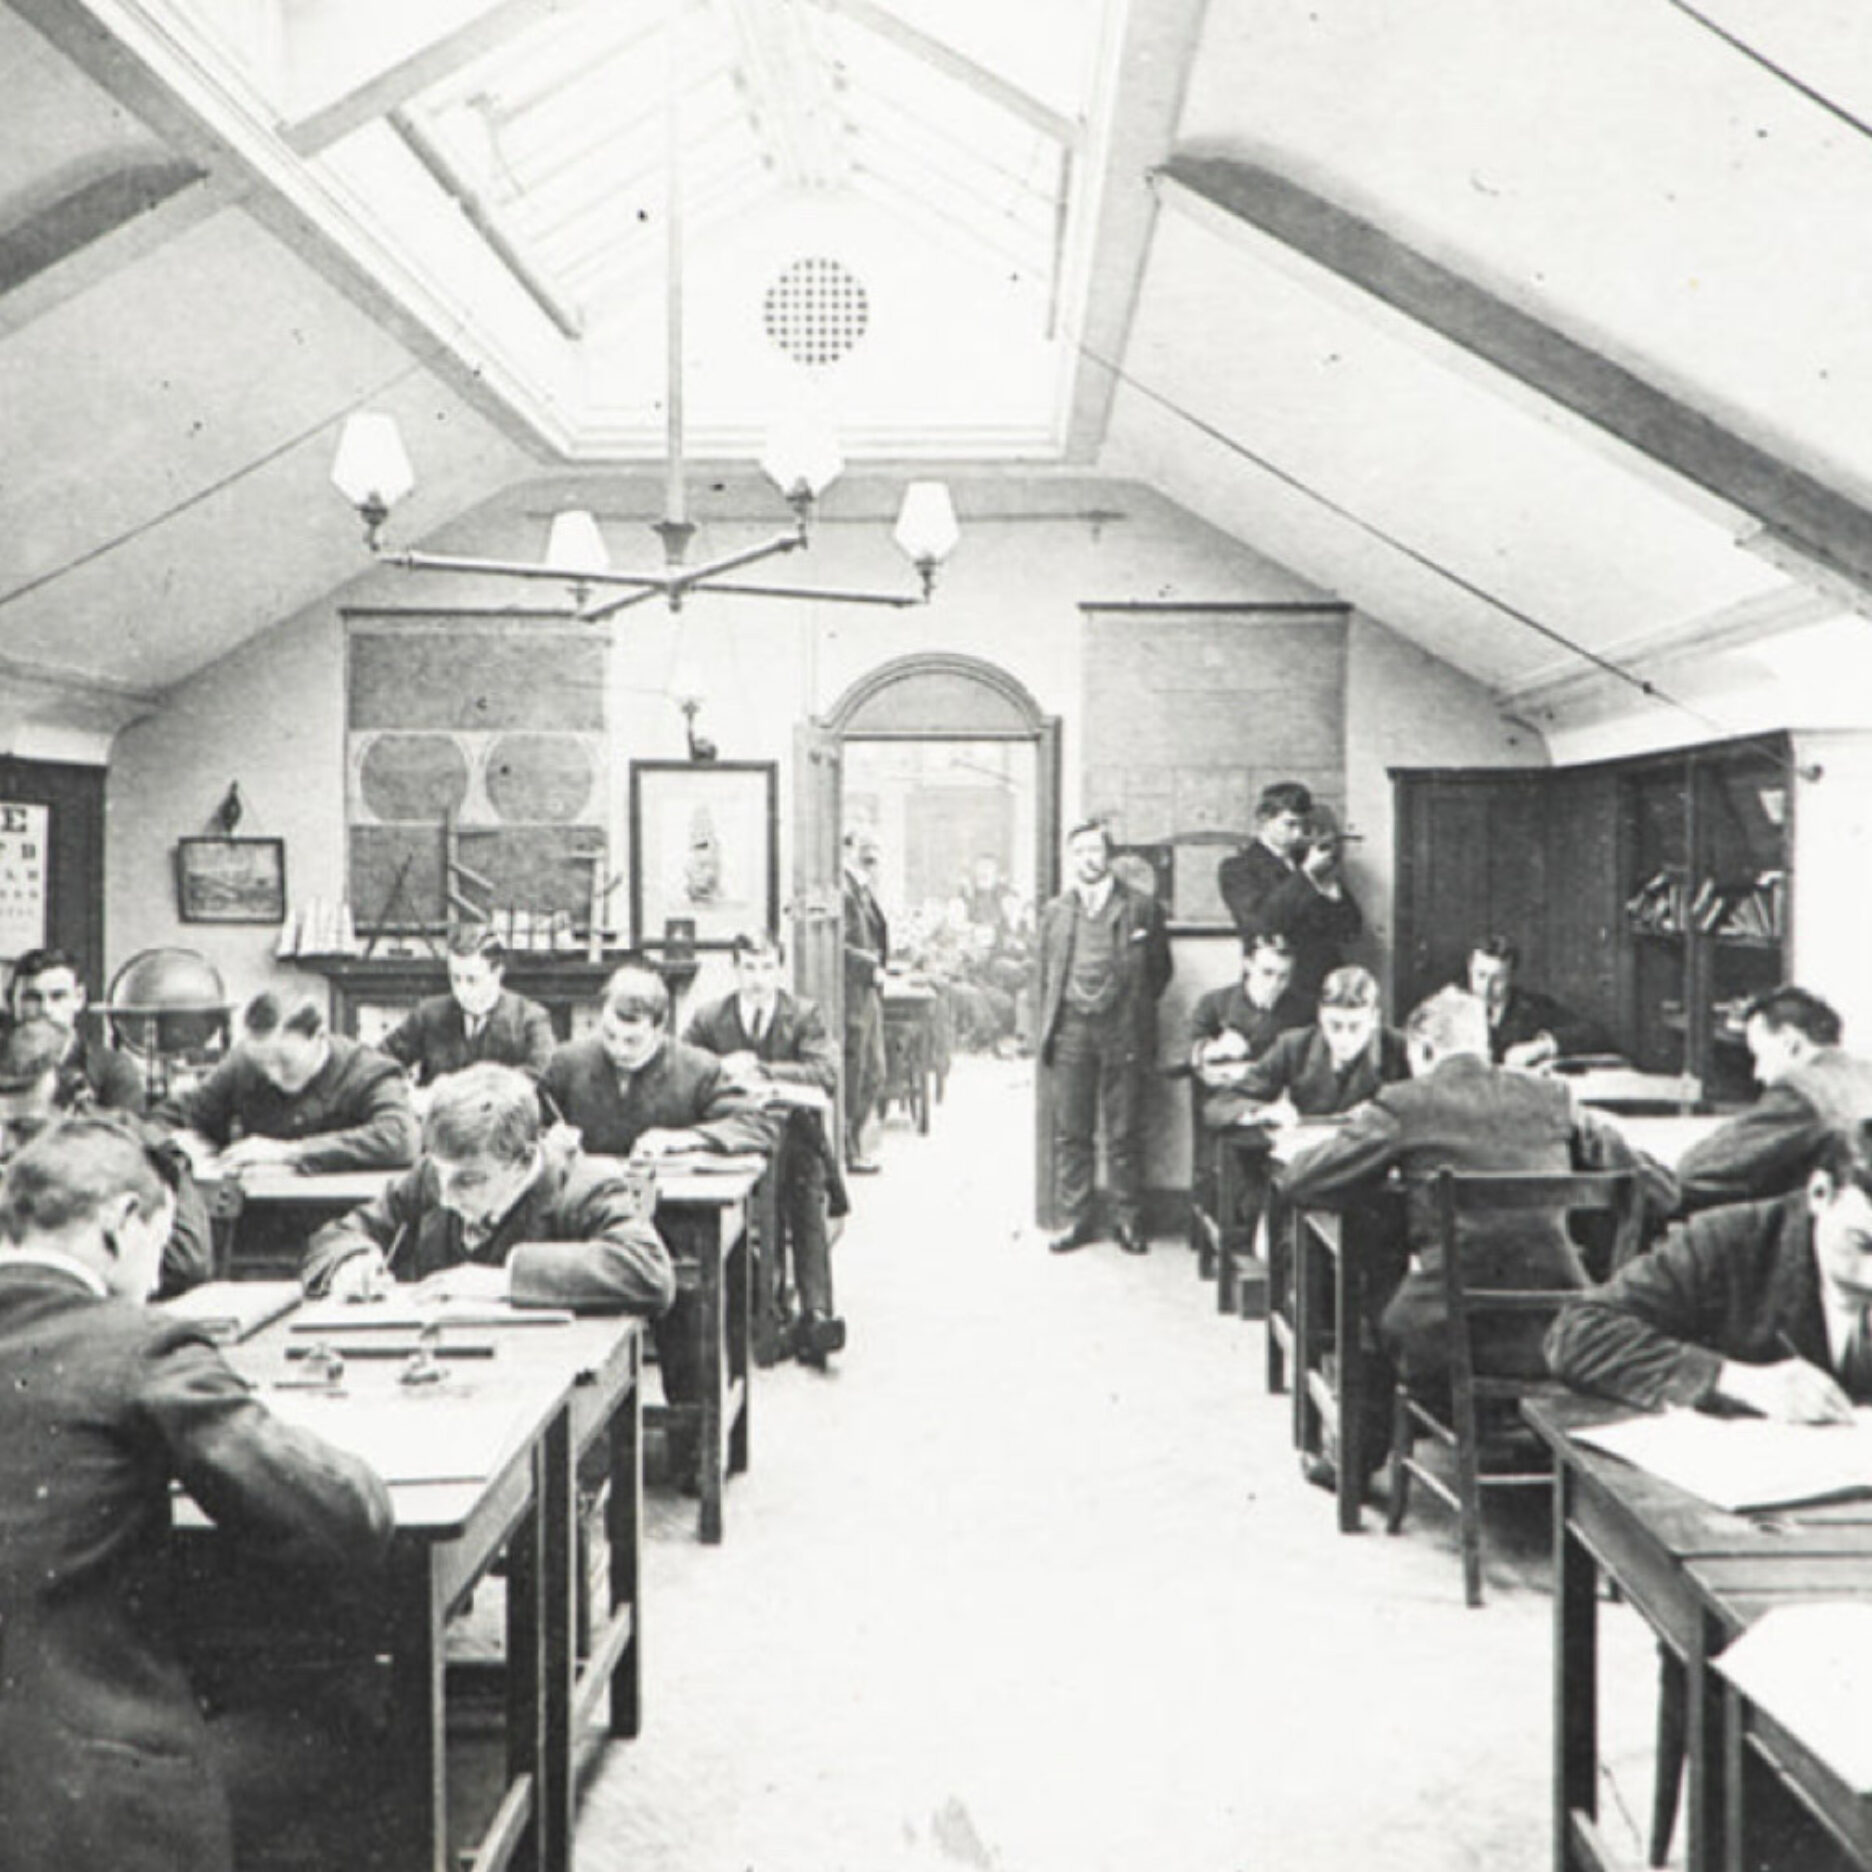 Nautical School classroom in the early 1900’s - 7606.1